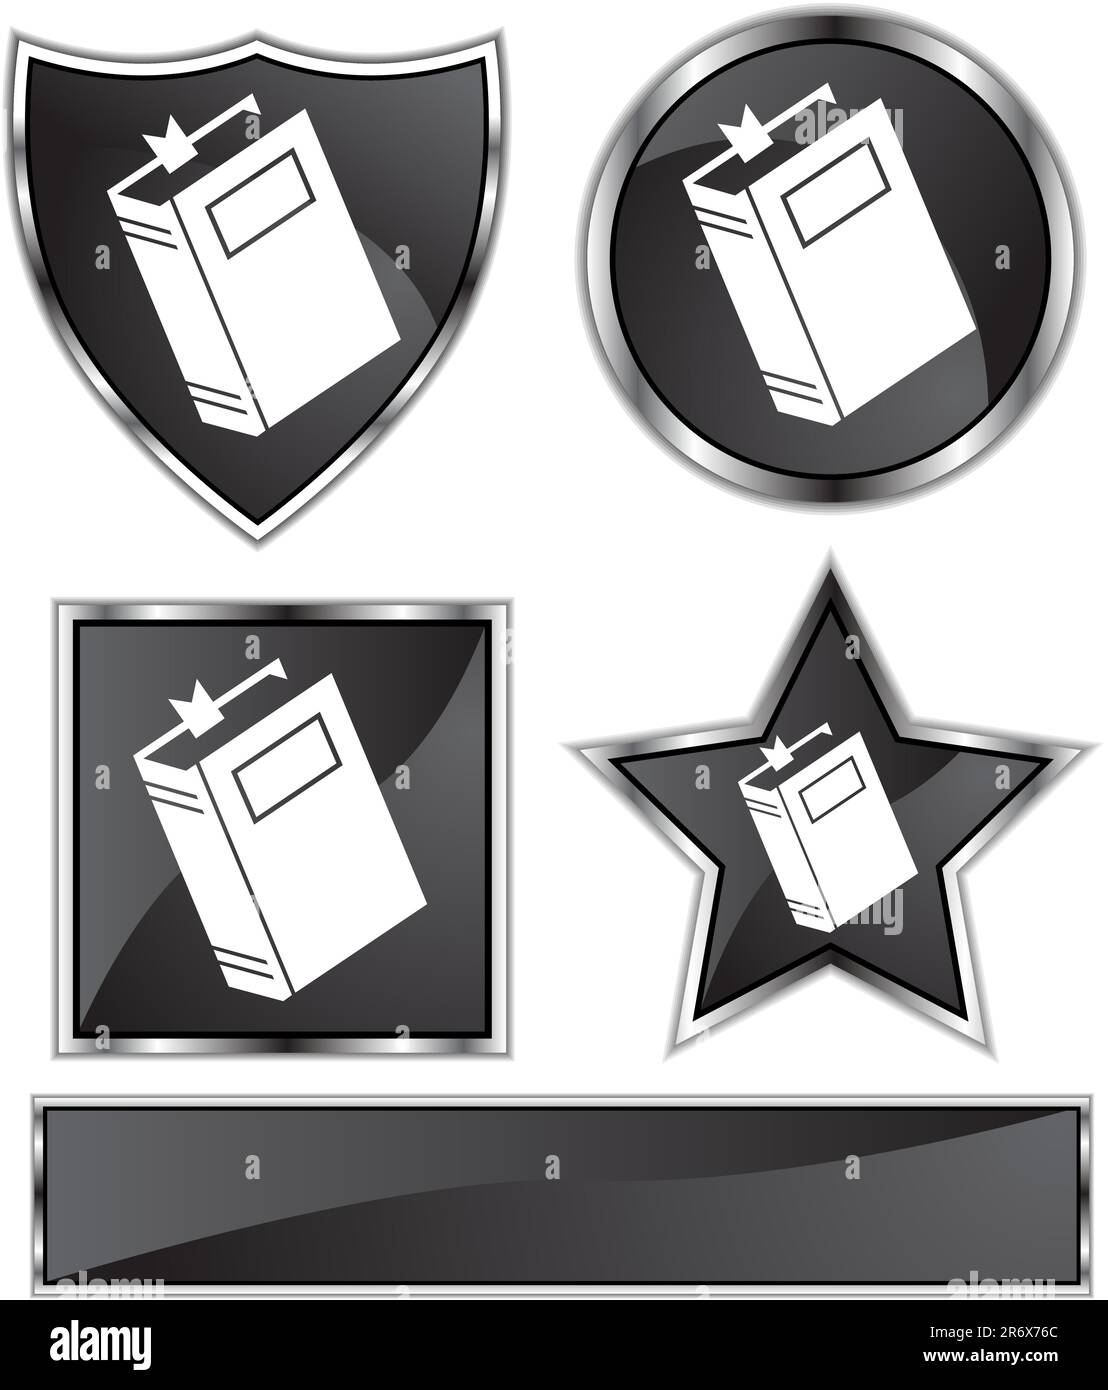 Black satin and chrome buttons in star, shield, circle and square shapes. Stock Vector